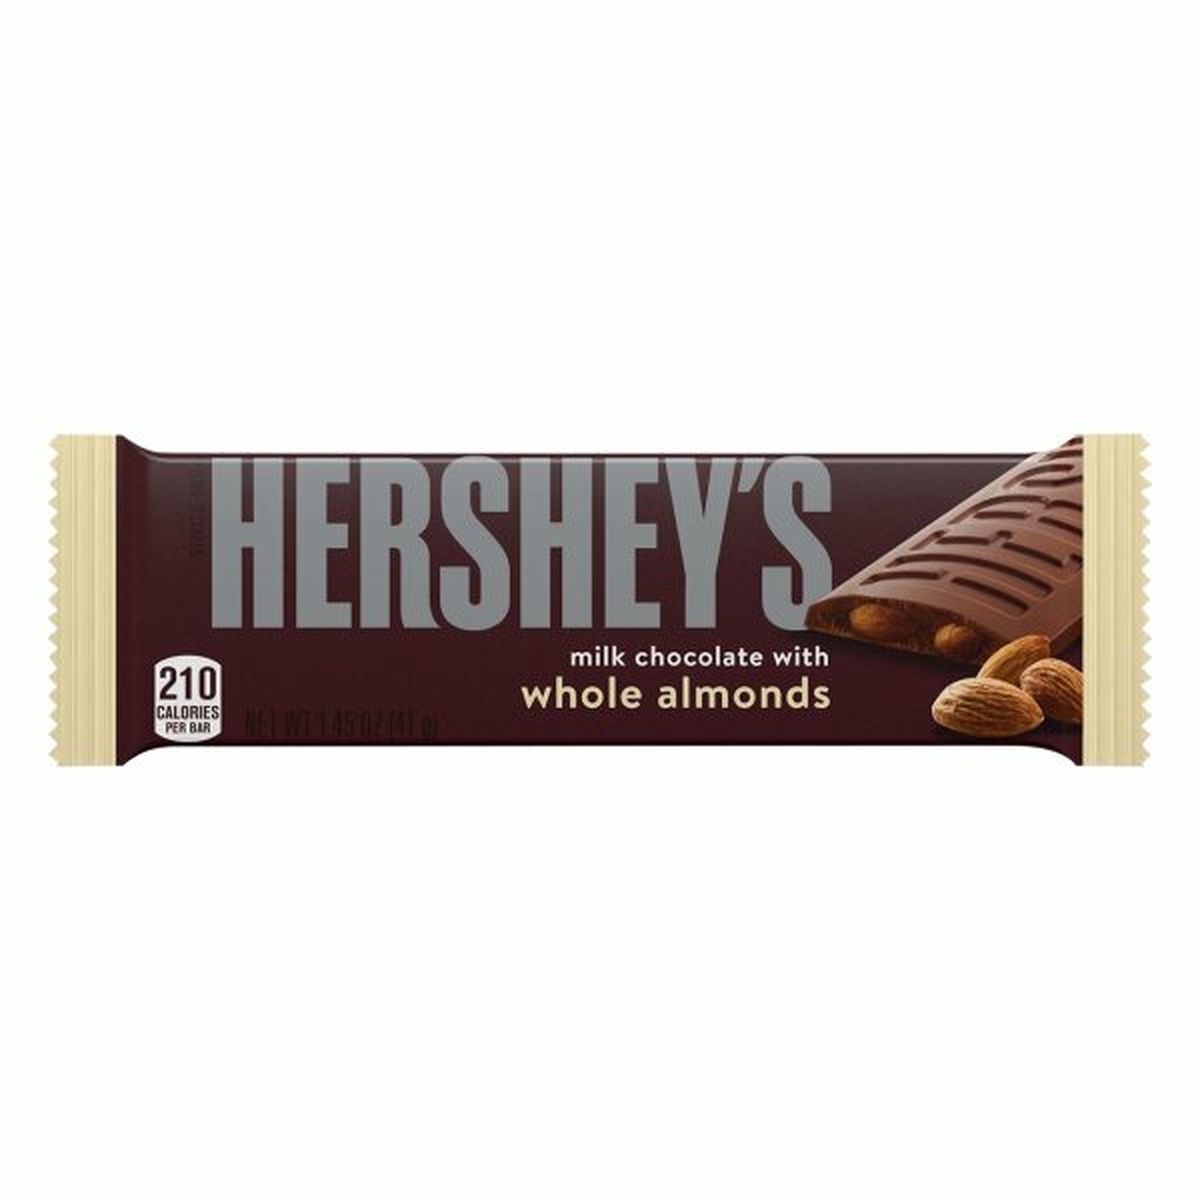 Calories in Hershey's Milk Chocolate, with Whole Almonds